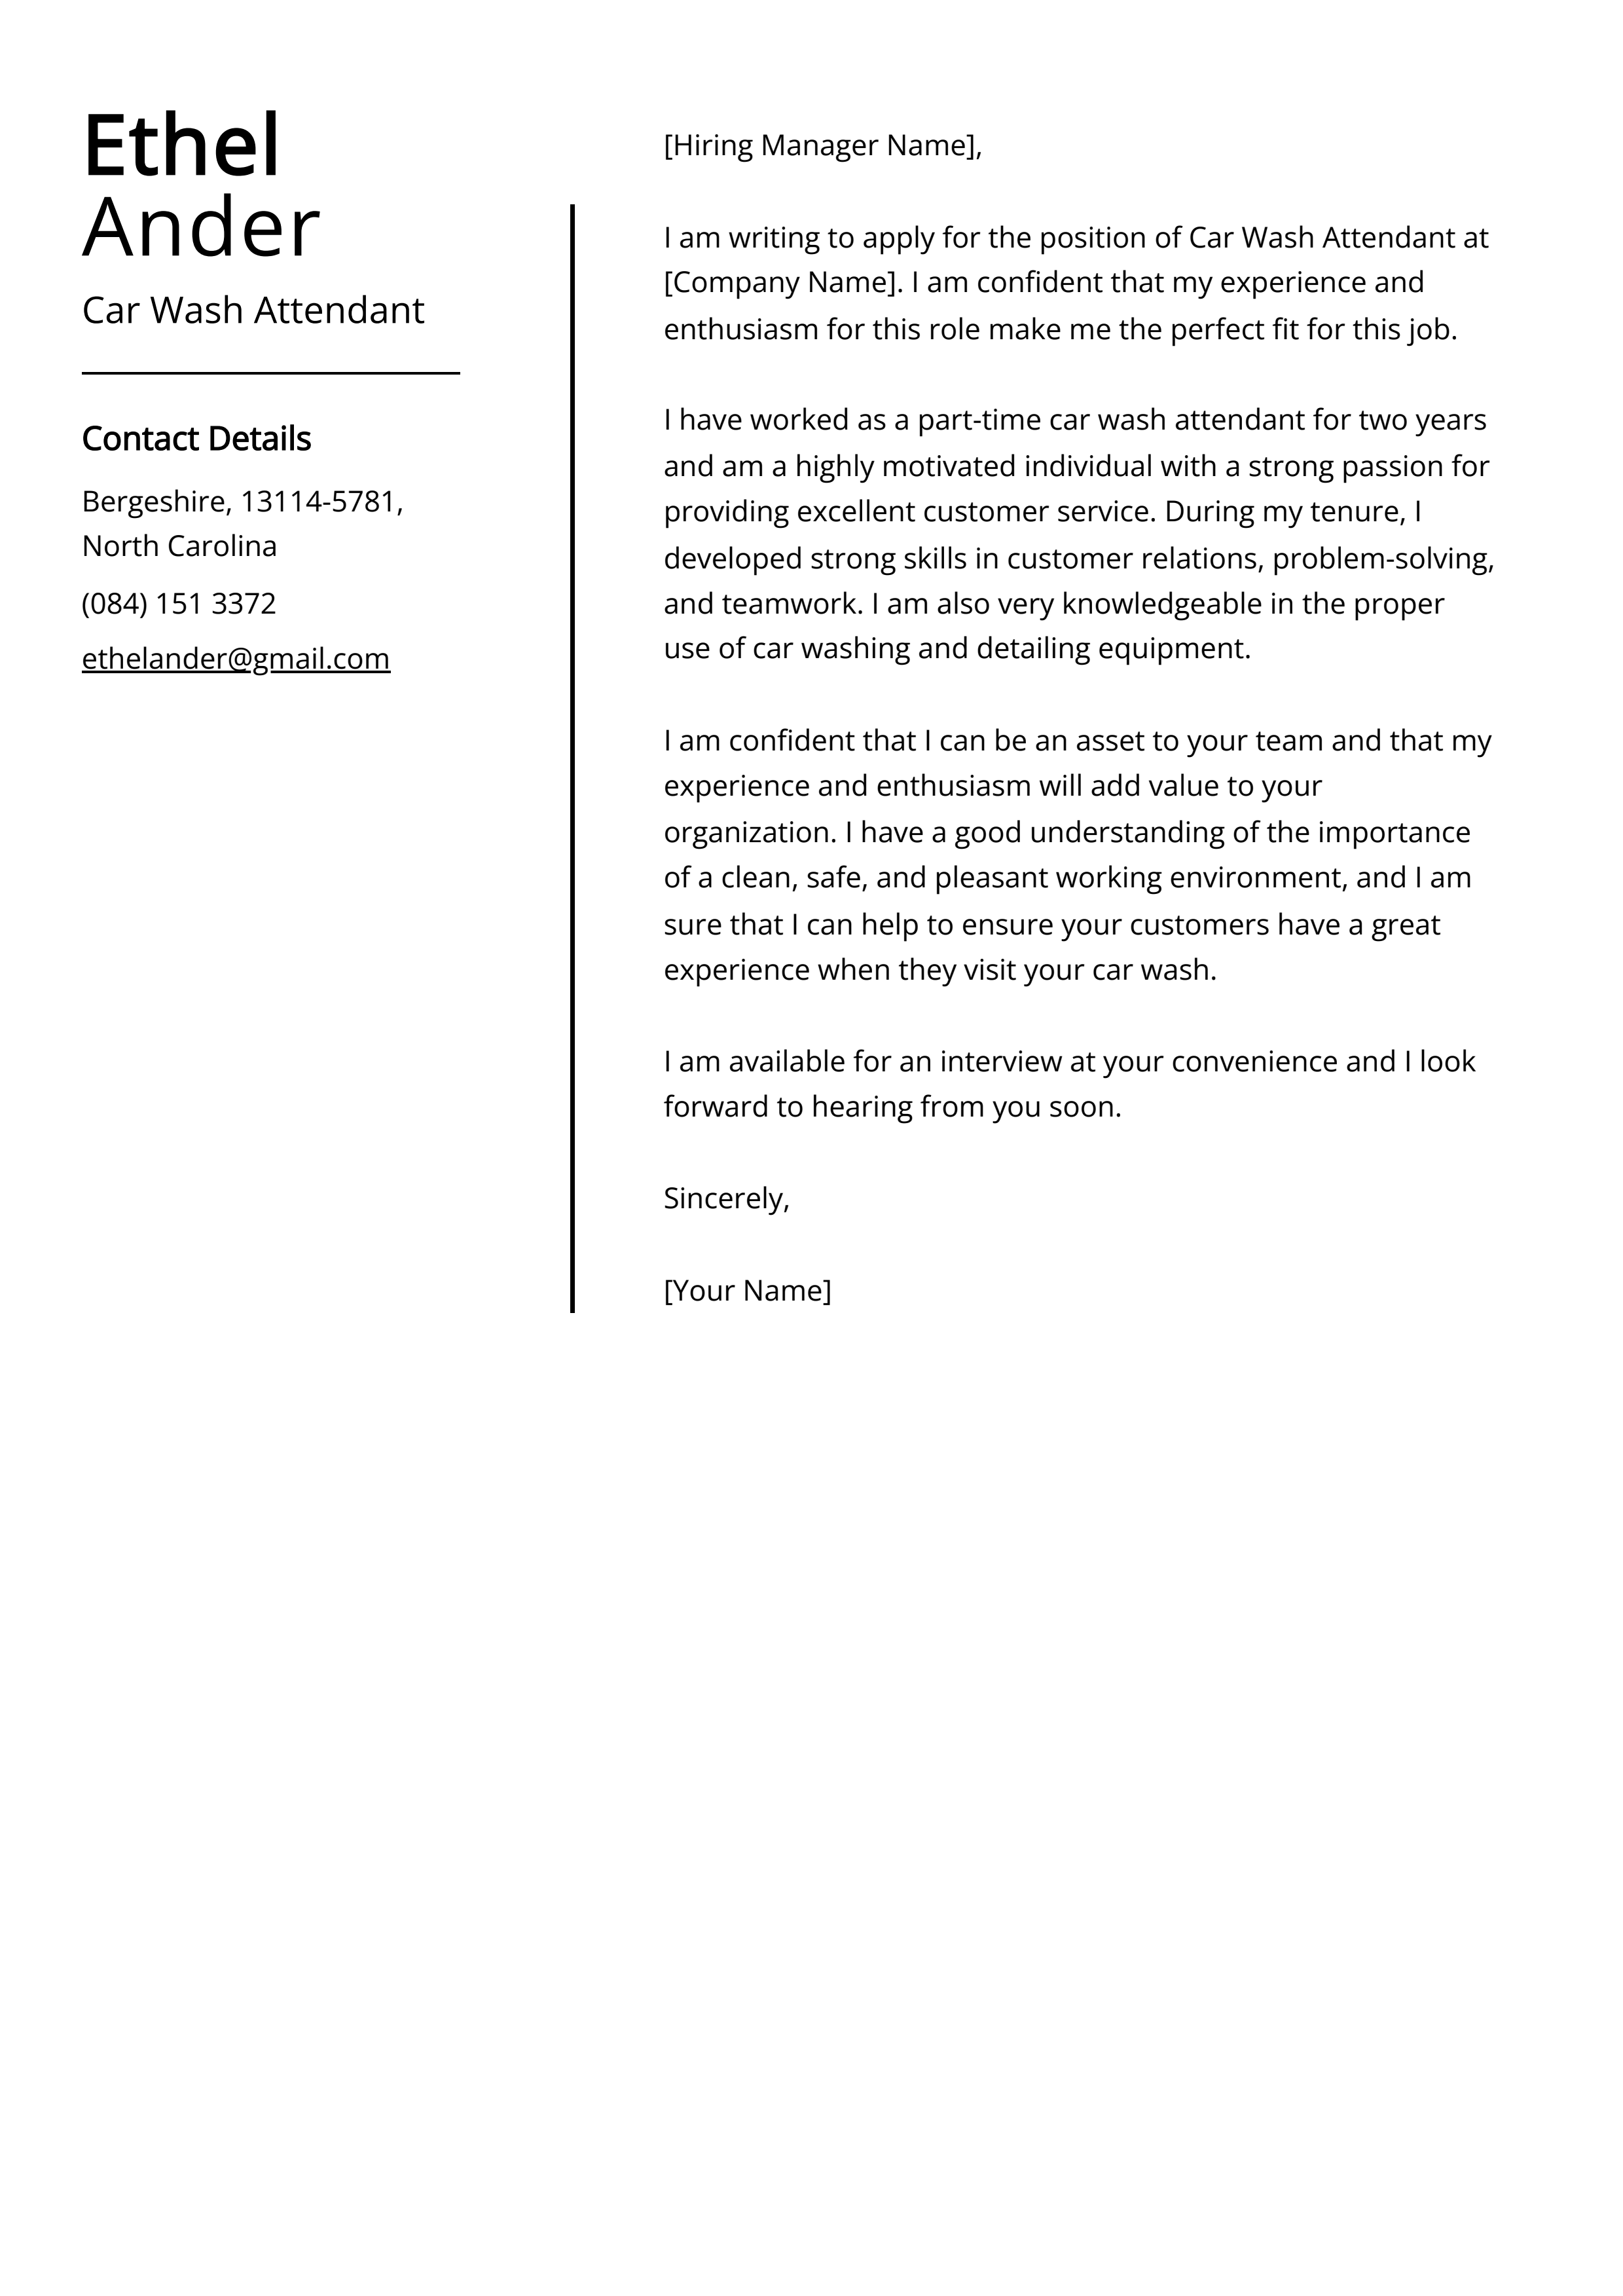 Car Wash Attendant Cover Letter Example